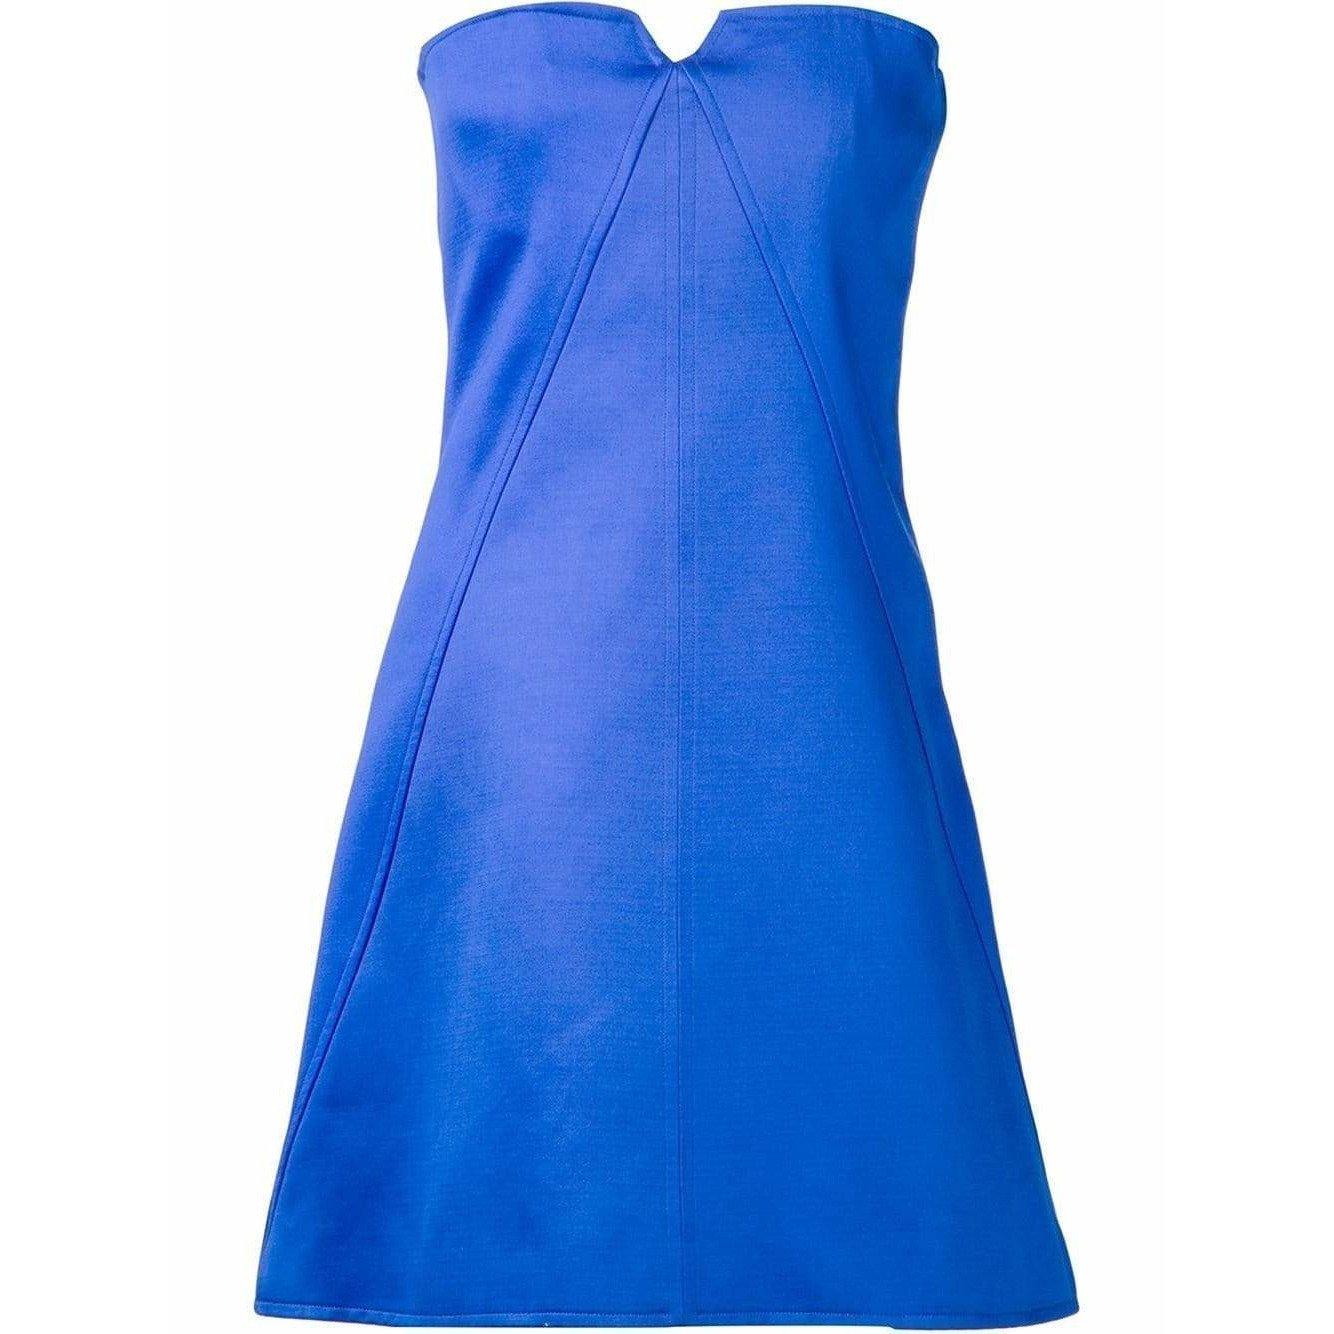 This brilliant blue A-line strapless dress is cotton with an inner corset and seam detailing from Courreges.